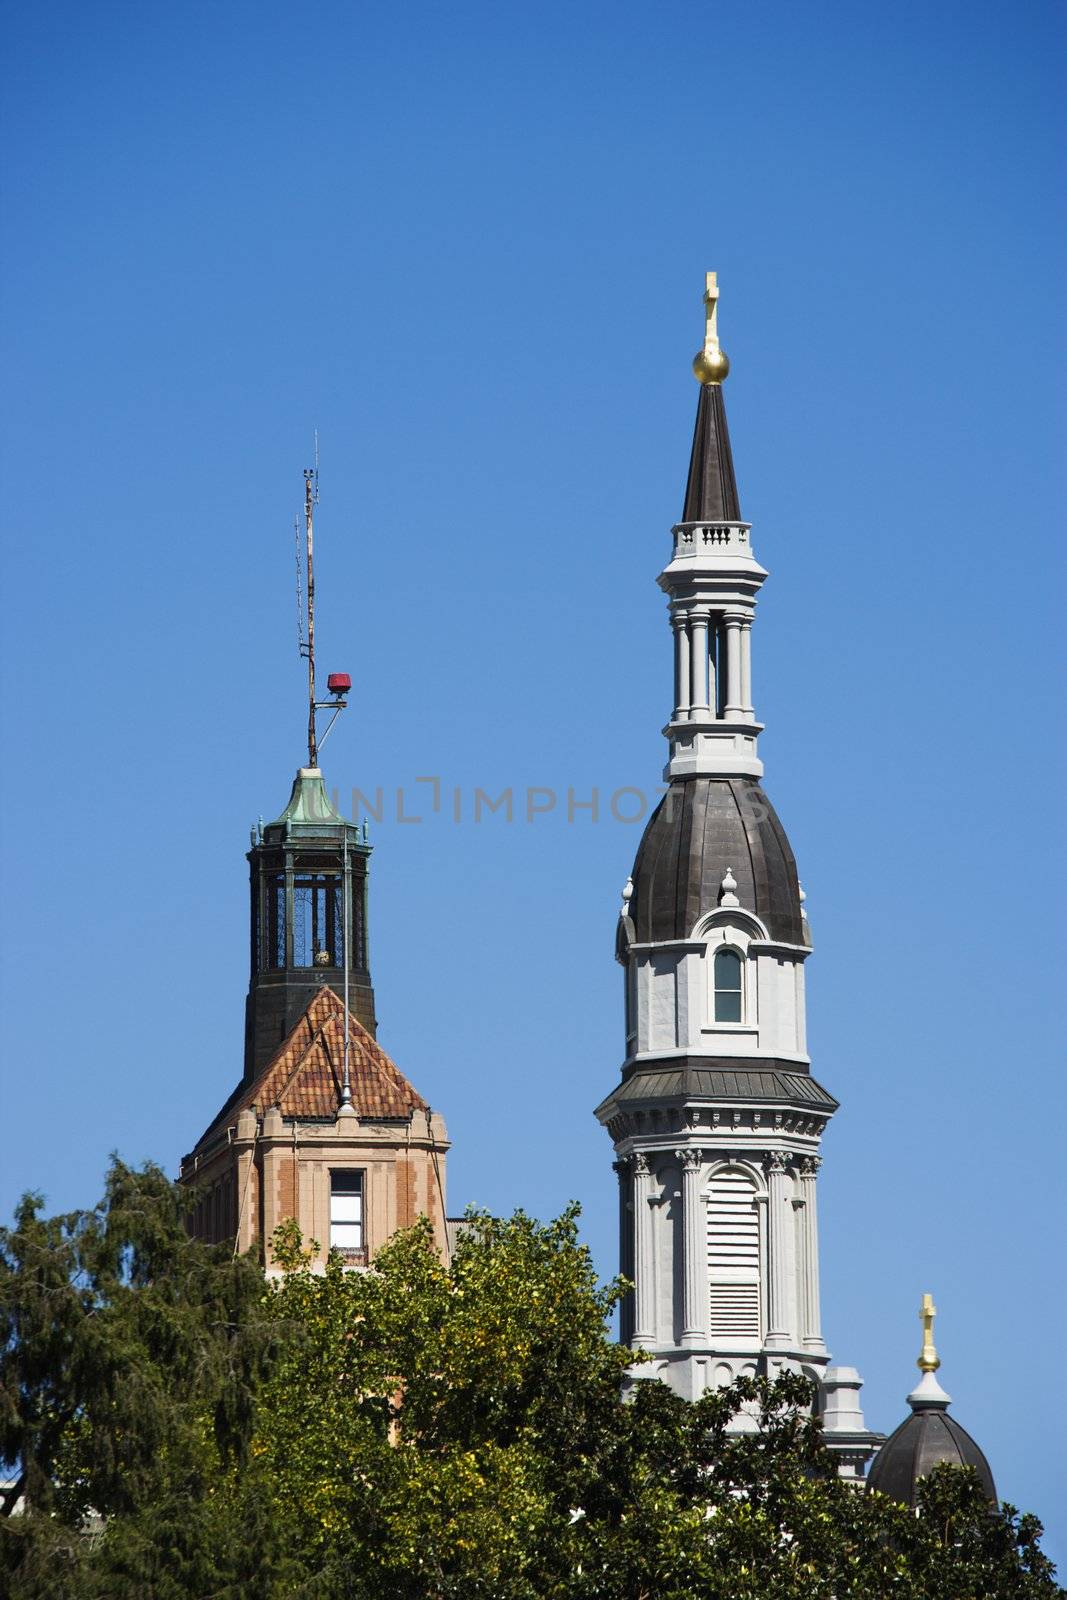 Steeple of the Cathedral of the Blessed Sacrament in Sacramento, California, USA.